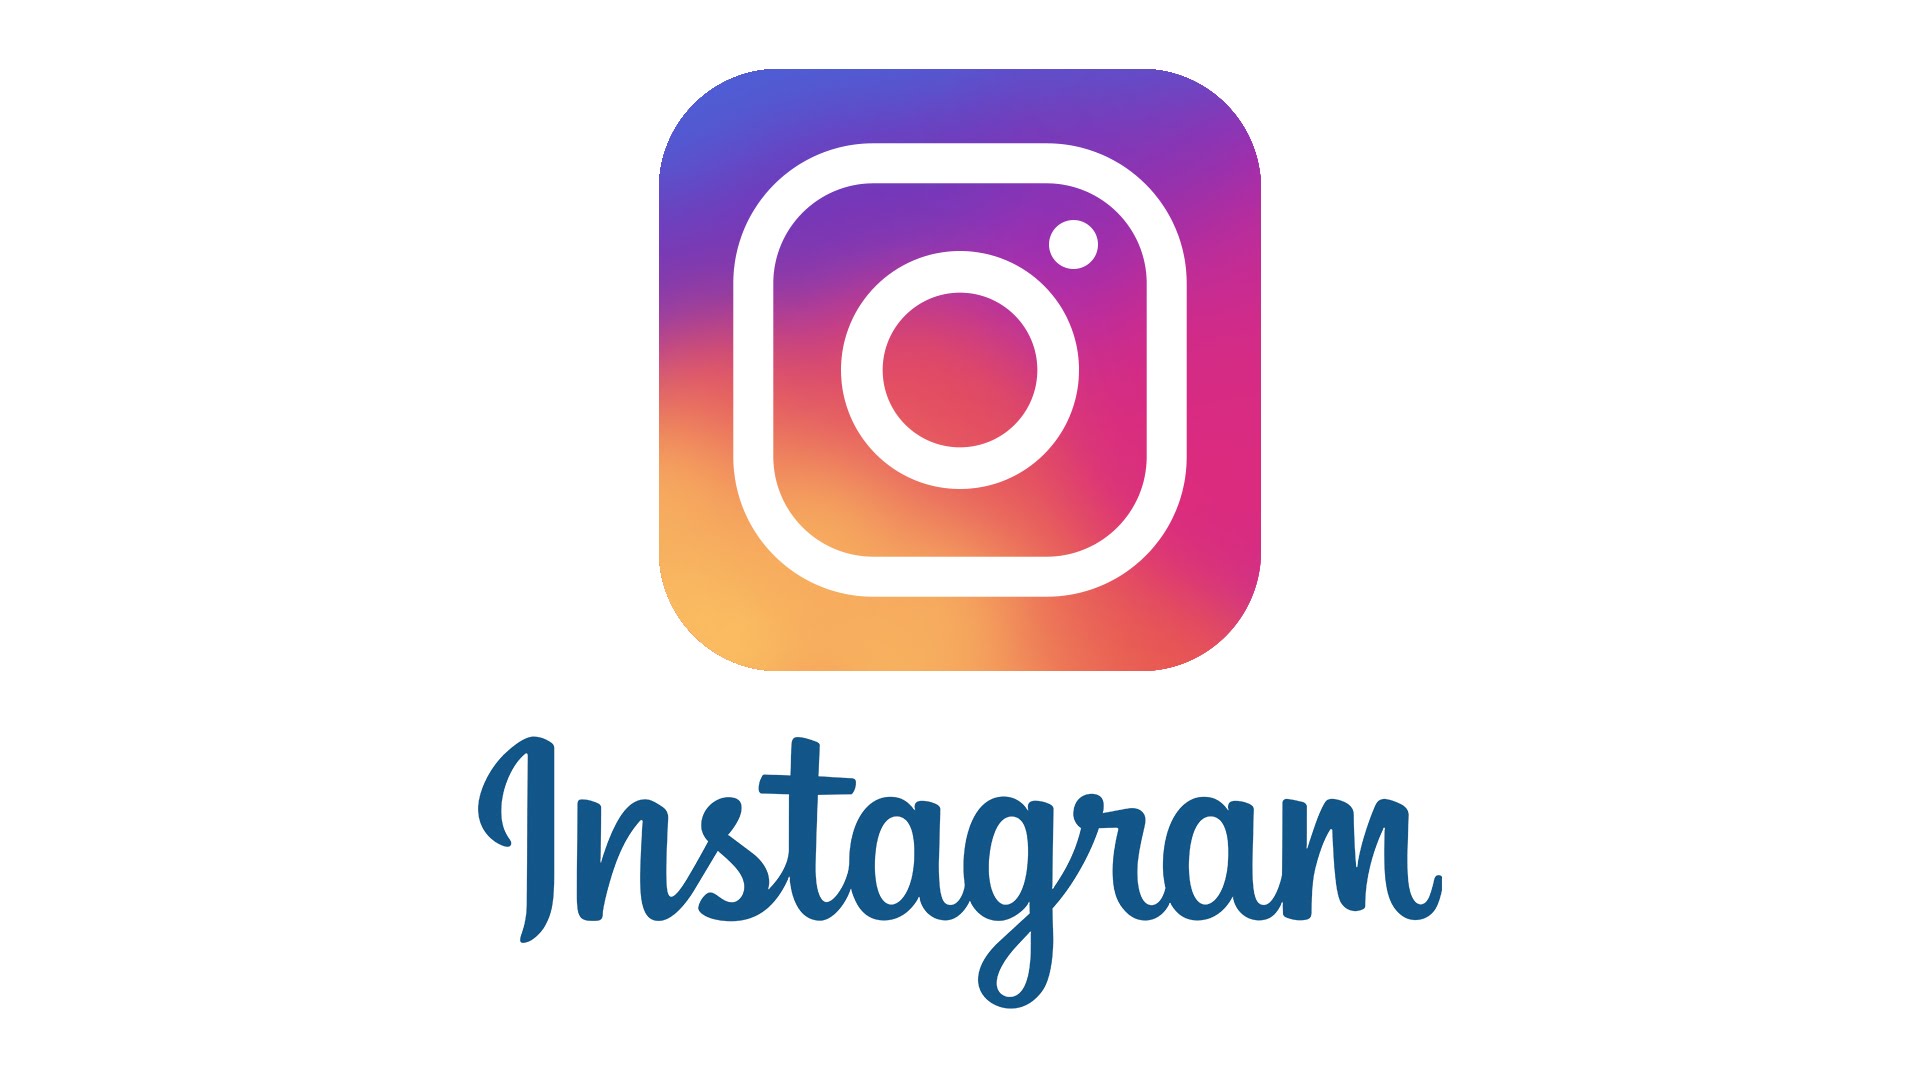 “Instagram” is written in cursive script beneath the white outline of a camera in the middle of a colorful square that makes up the Instagram logo.